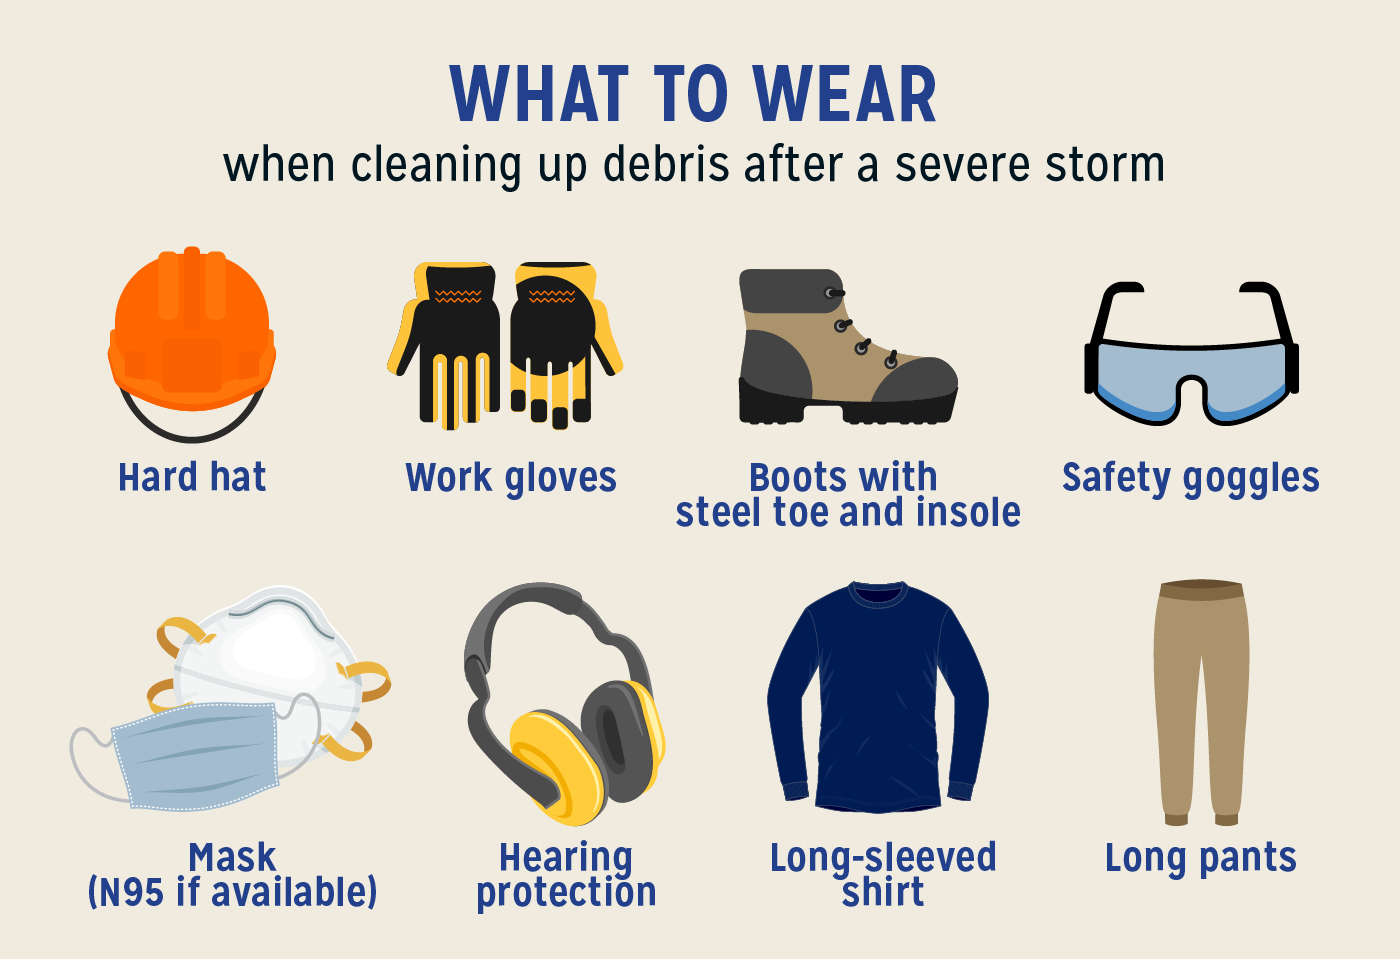 What to wear when cleaning up debris after severe storm